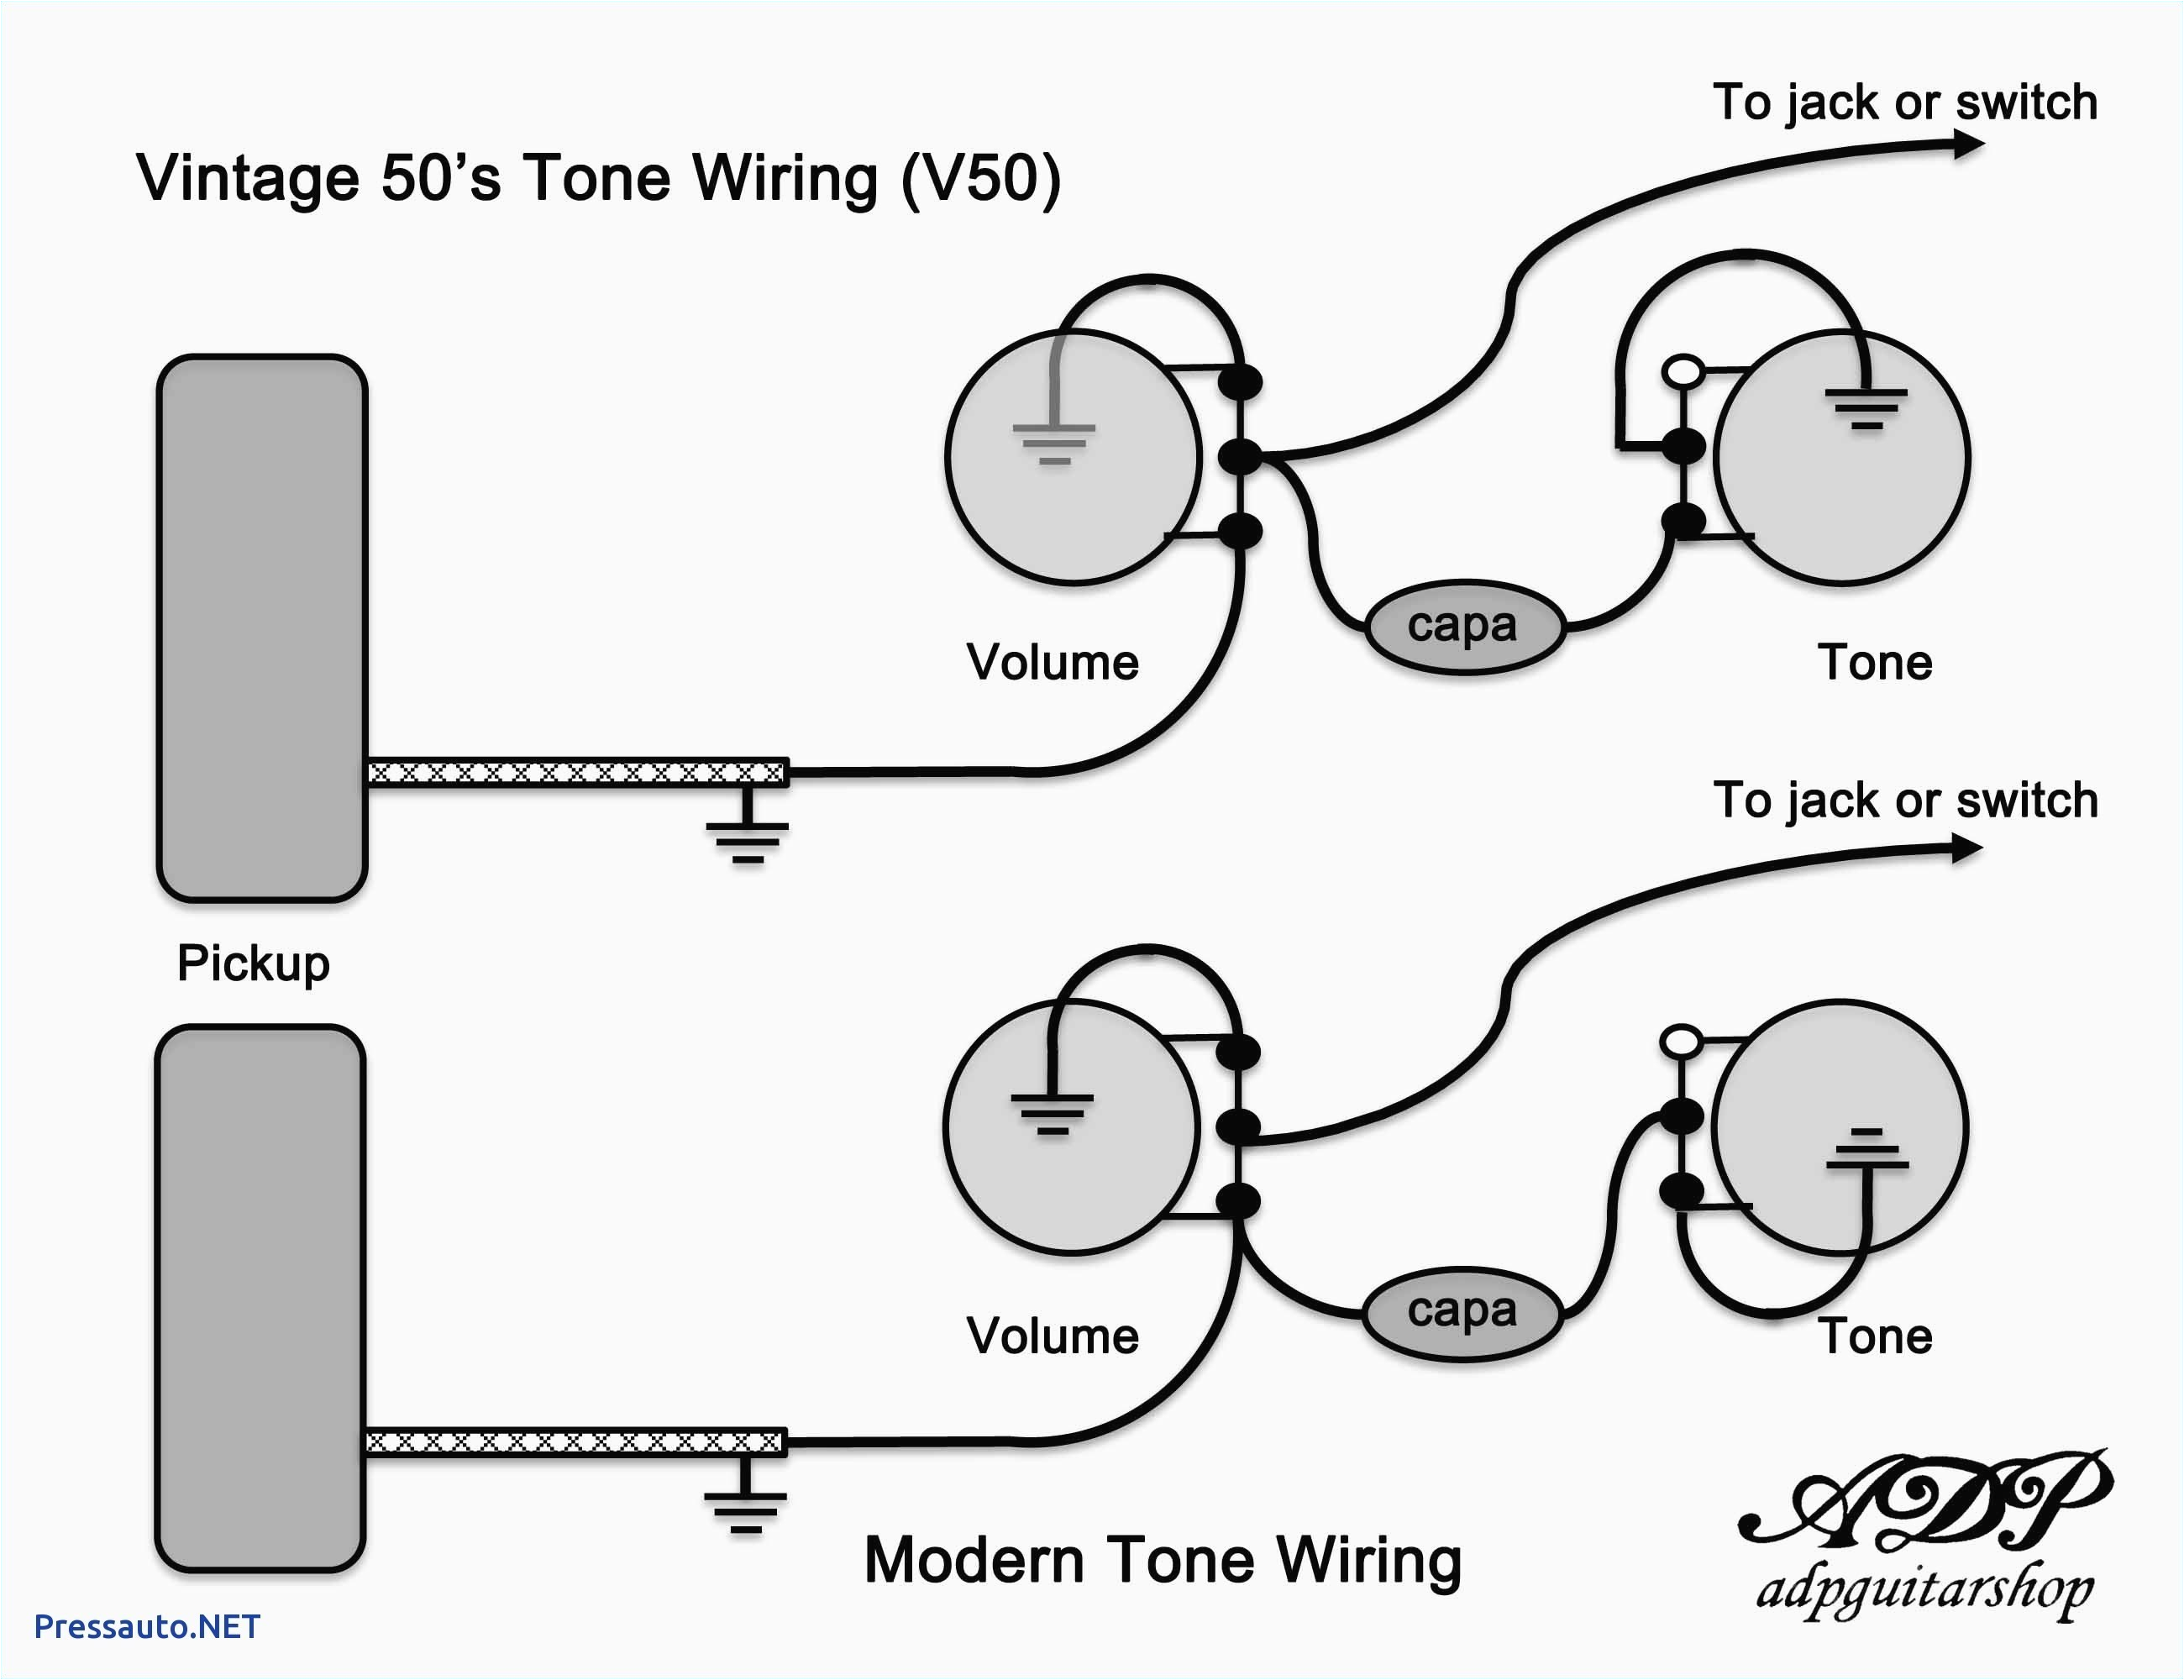 les paul special wiring diagram valid p90 diagrams schematics of epiphone dot at gibson es 335 since es335 wiring diagram png